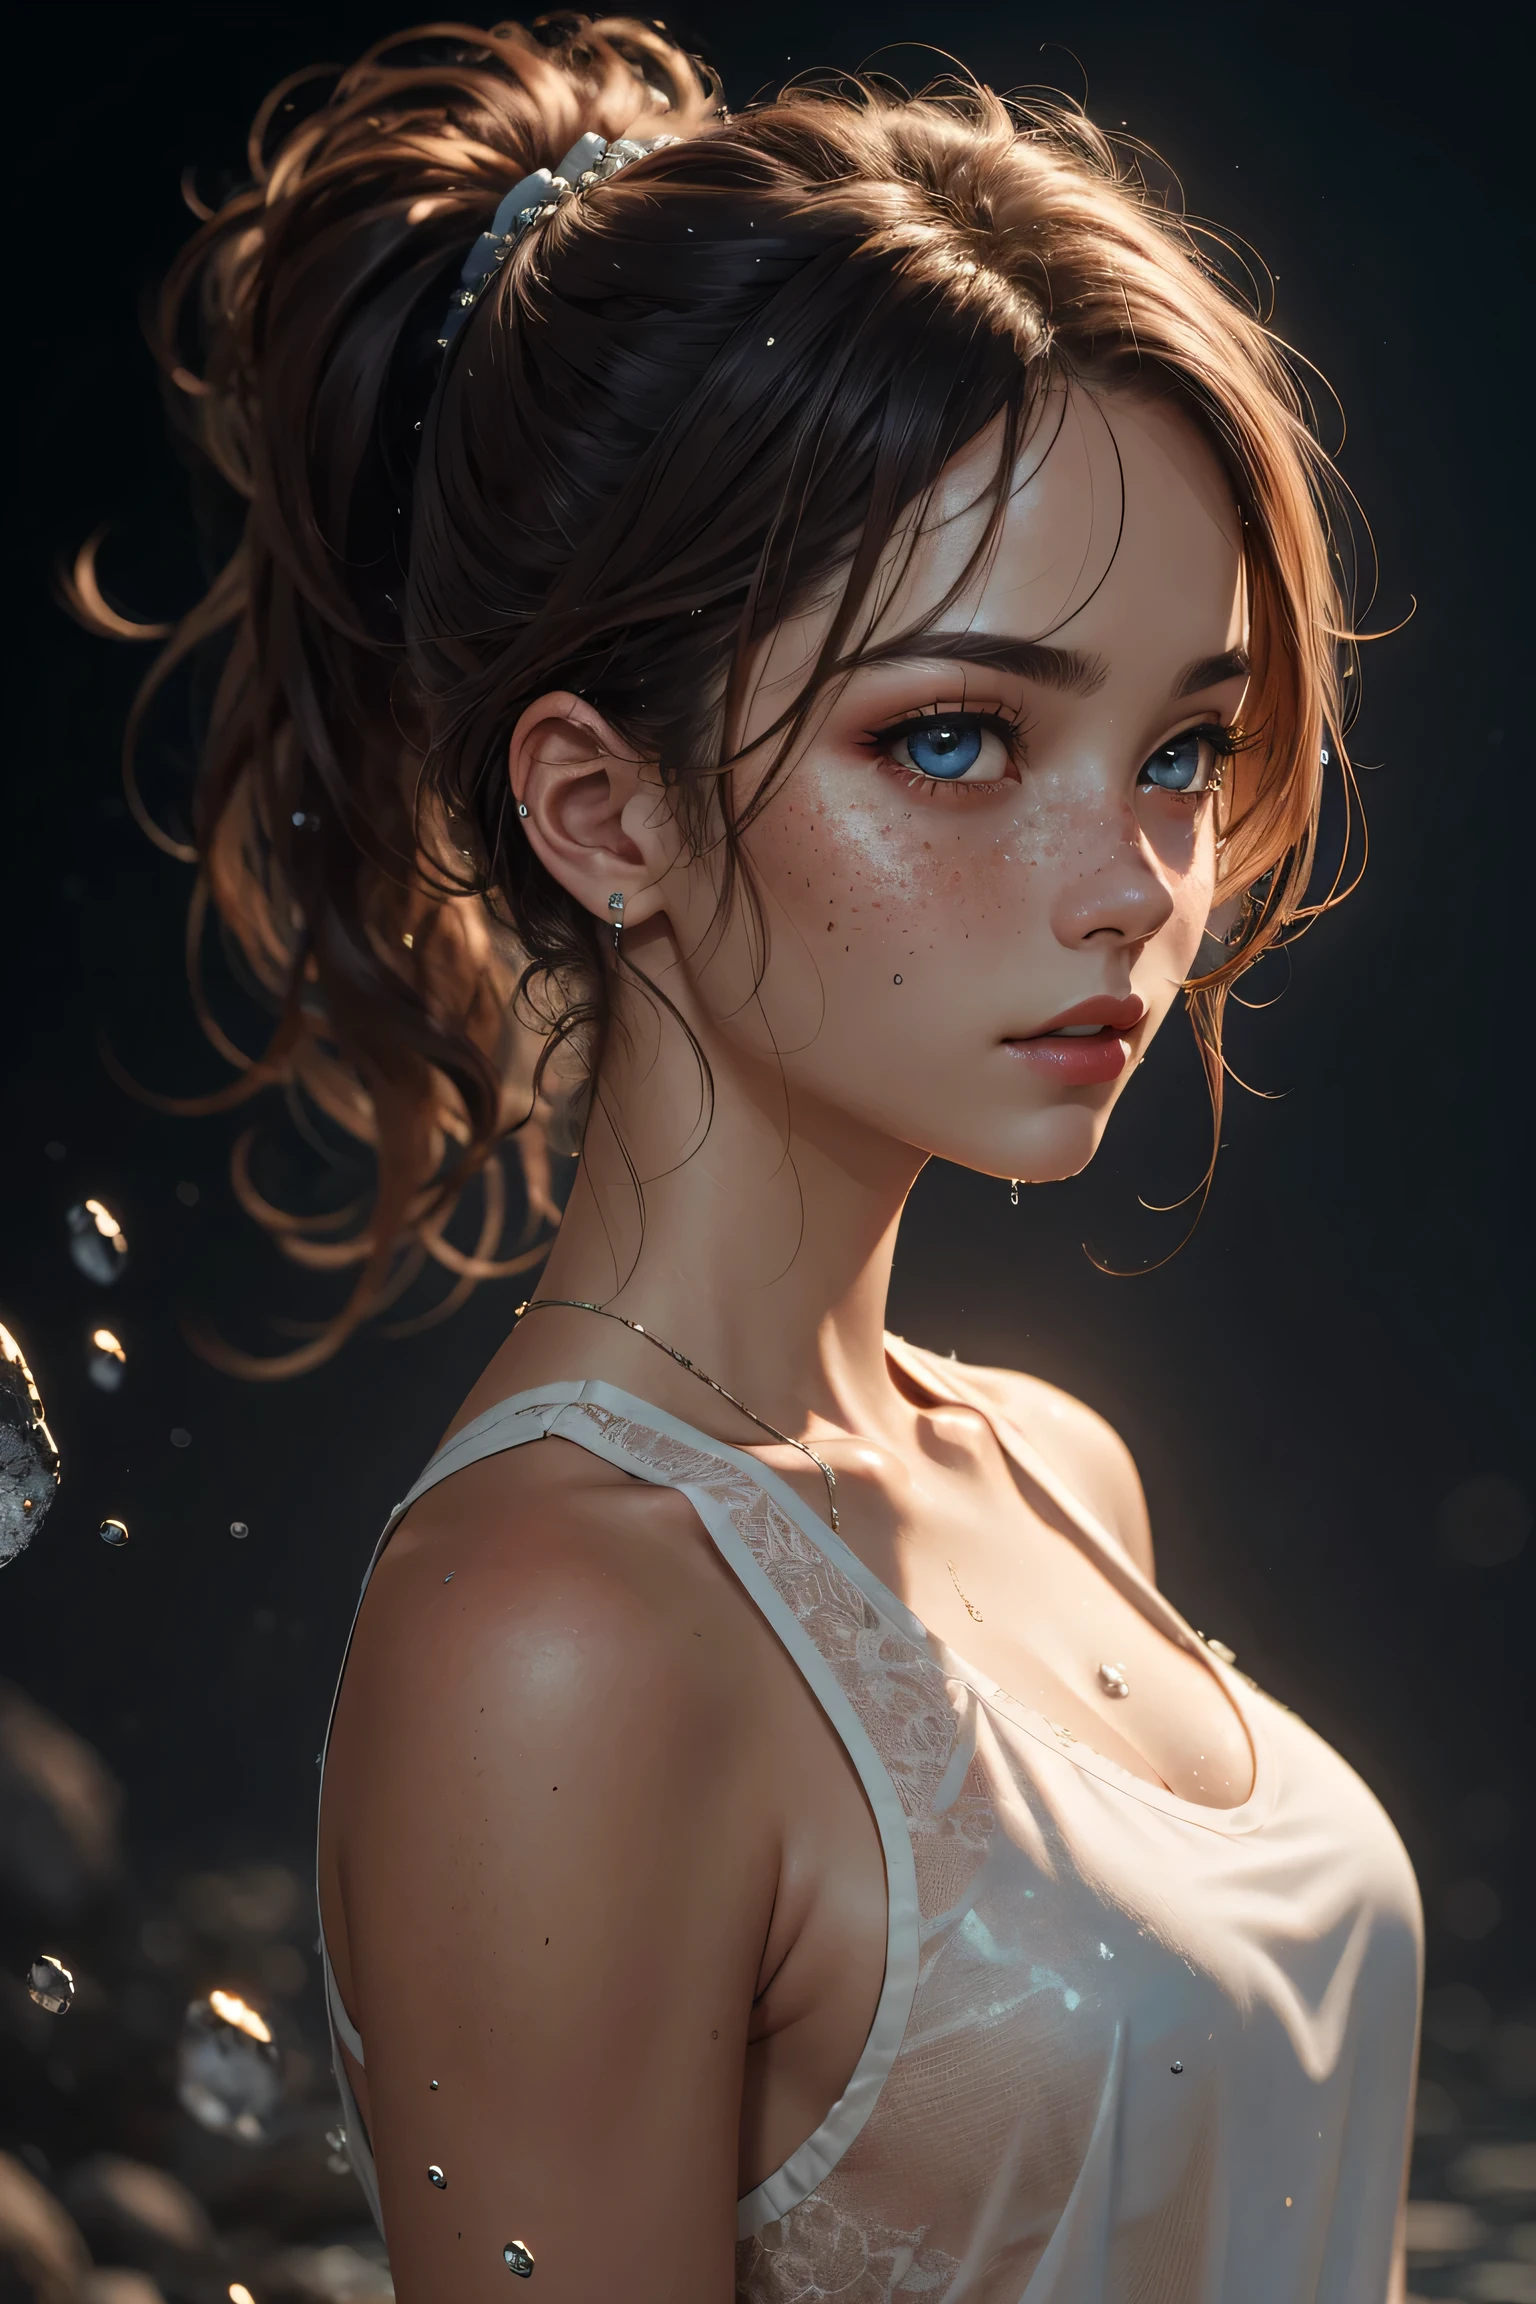 girl,detailed background, atmospheric, hair flowing in the wind,, auburn hair in ponytail, full body image, wearing see through wet white clothes, , tan skin, oily skin, wet hair, freckles, blue eyes, goth makeup, floating particles, backlightinasterpiece))), (((masterwork))), ((top quality)), ((best quality)), ((highest quality)), ((highest fidelity)), ((highest resolution)), ((highres)), ((highest detail)), ((highly detailed)), ((hyper-detailed)), (((detail enhancement))), ((deeply detailed)), awe inspiring, breathtaking, uhd, hdr, fhd, 8k, 16k, 32k, k, meticulous, intricate, intimate, nuanced, (((the most beautiful images in existence))), (((the most beautiful artwork in the world))), (RAW photo, film grain), caustics, subsurface scattering, reflections, photorealistic, 35mm, , natural skin texture, hyperrealism, sharp,